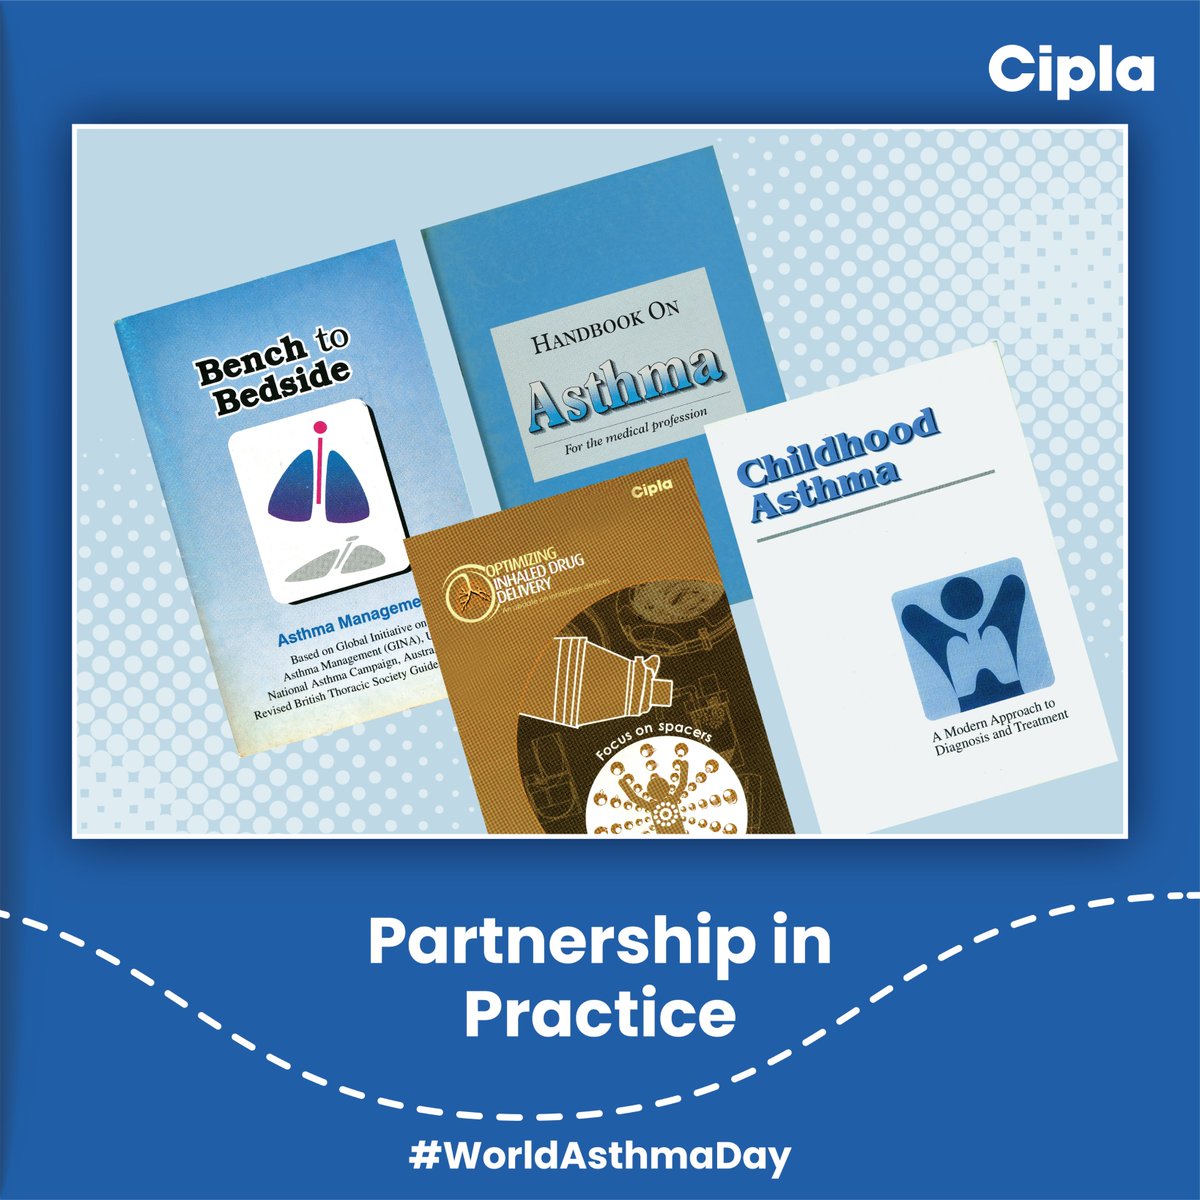 Recognizing the importance of #AsthmaAwareness Cipla played a pioneering role in disseminating information to enhance quality of care for patients.
 
With the purpose of #CaringforLife Cipla developed an unmatched range of respiratory drugs & devices to help millions #breathefree